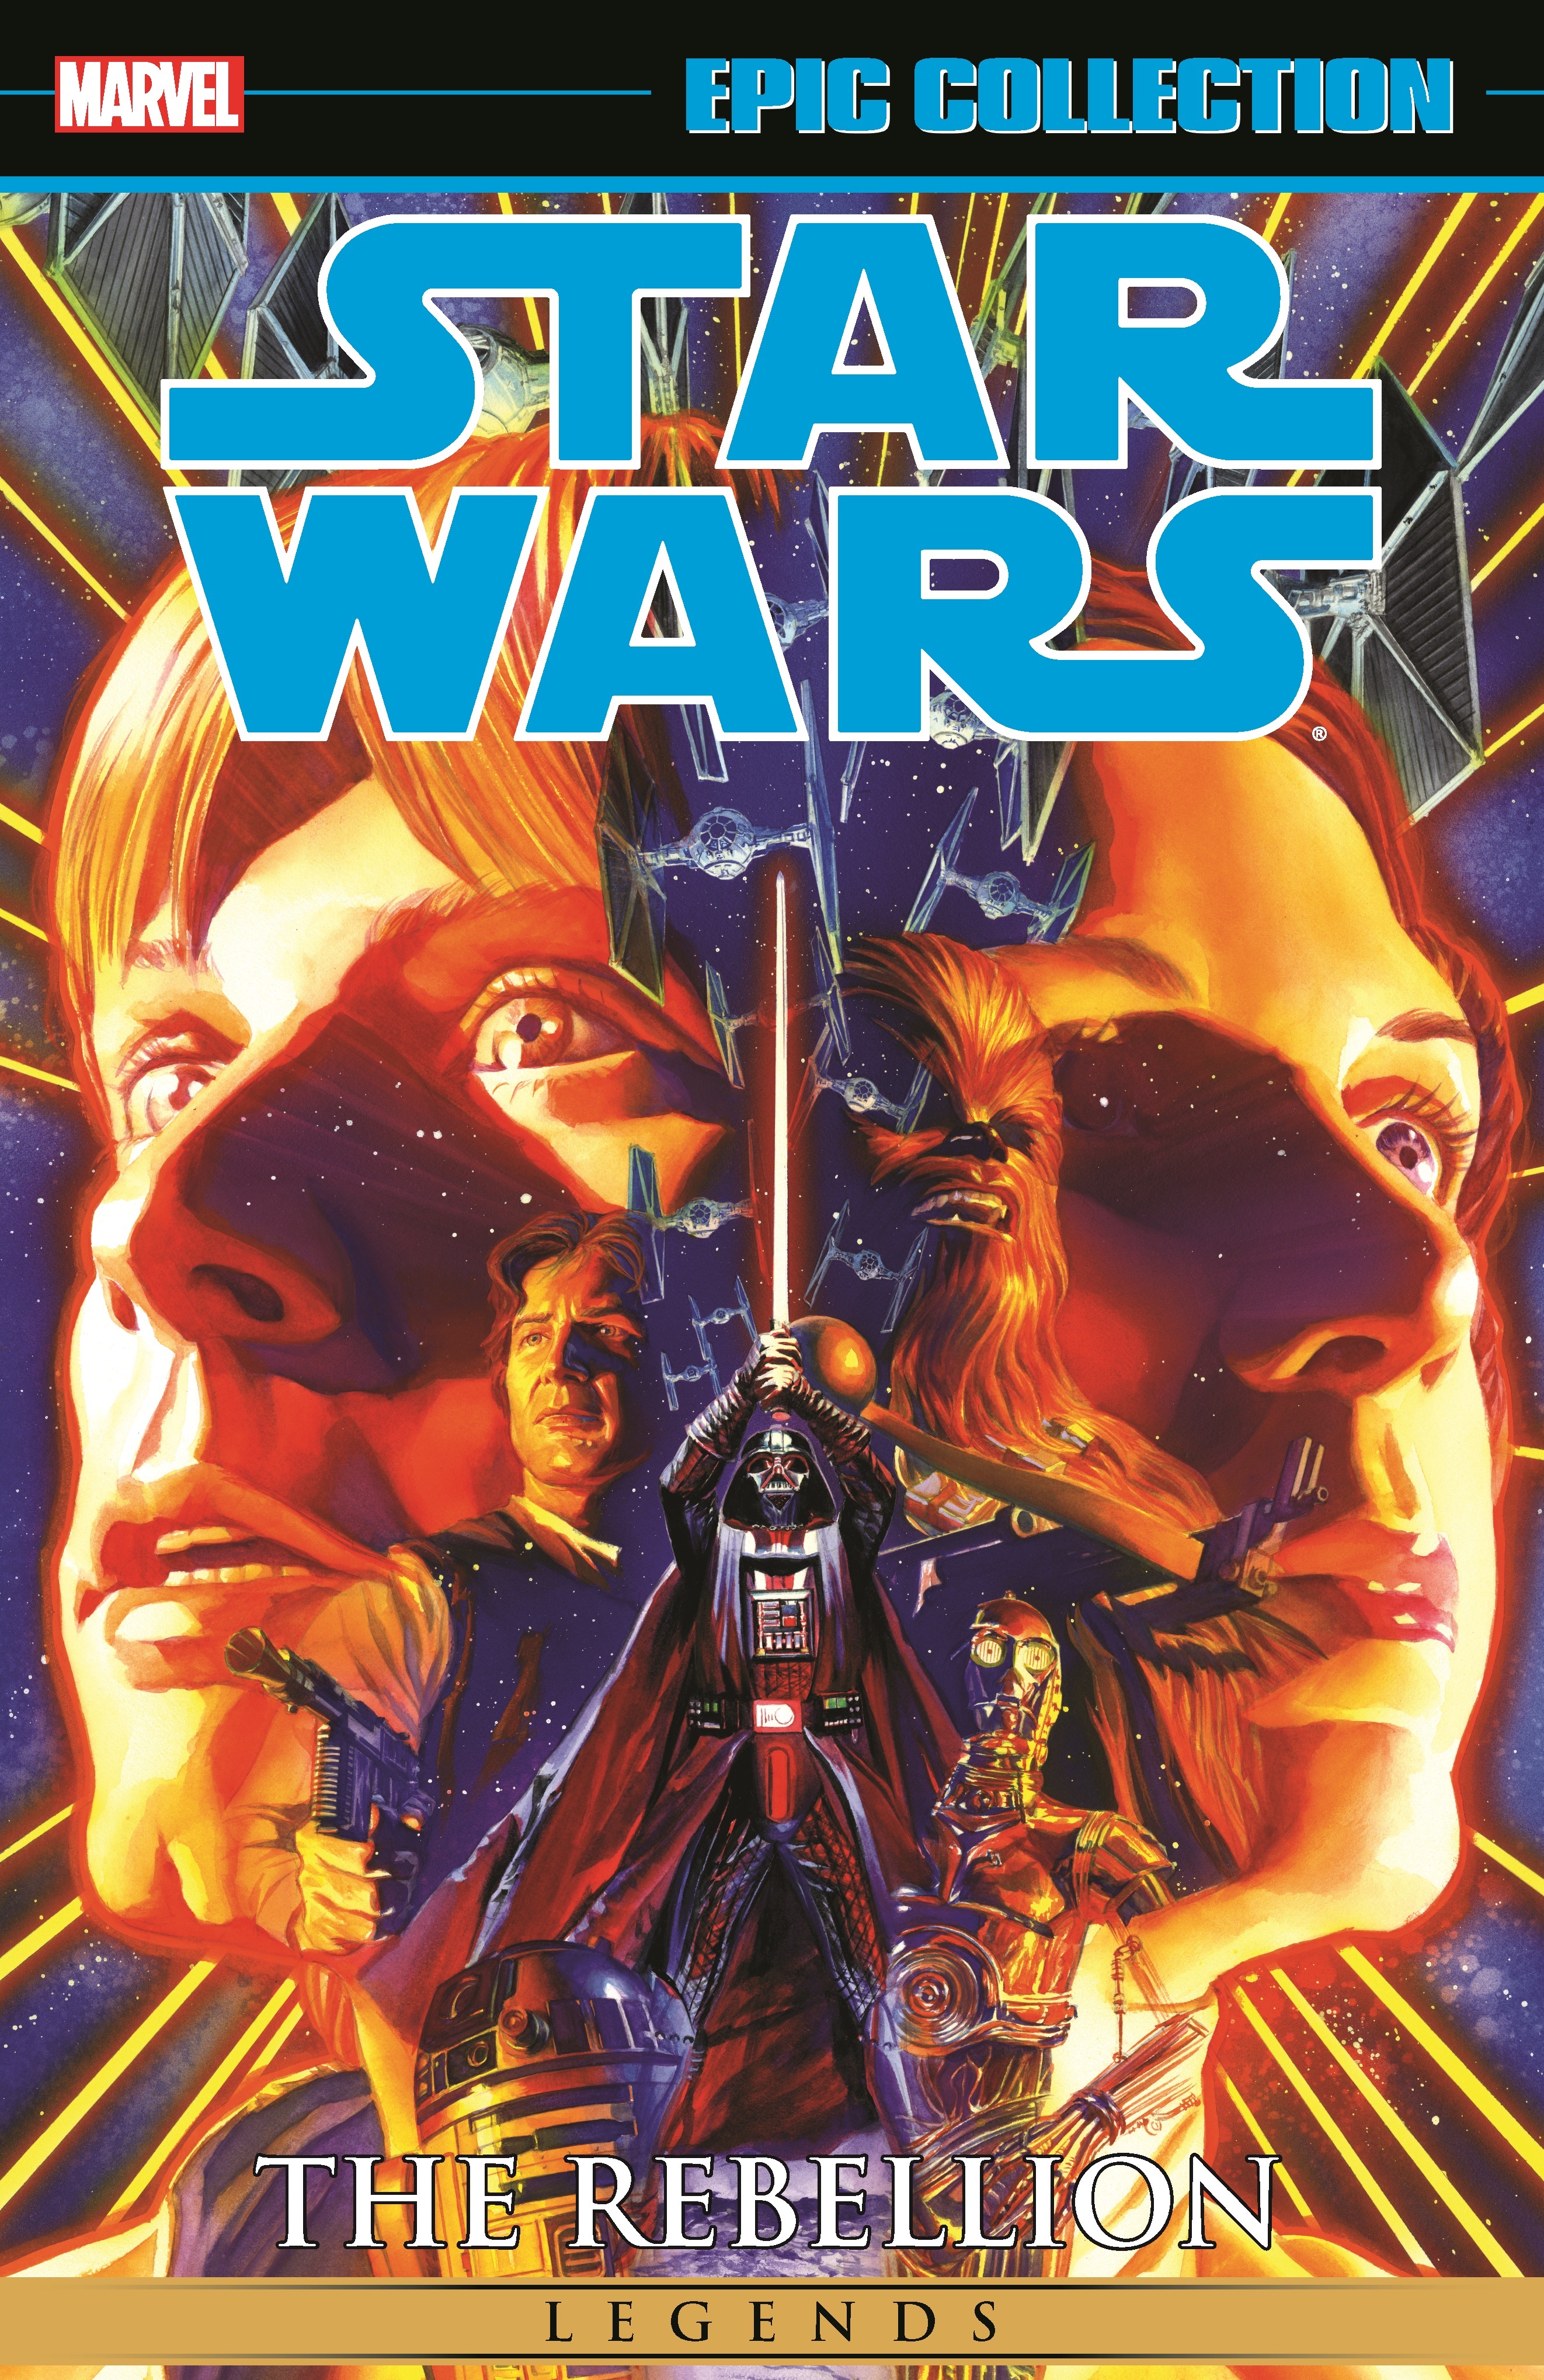 Star Wars Legends Epic Collection: The Rebellion Vol. 1 (Trade Paperback)